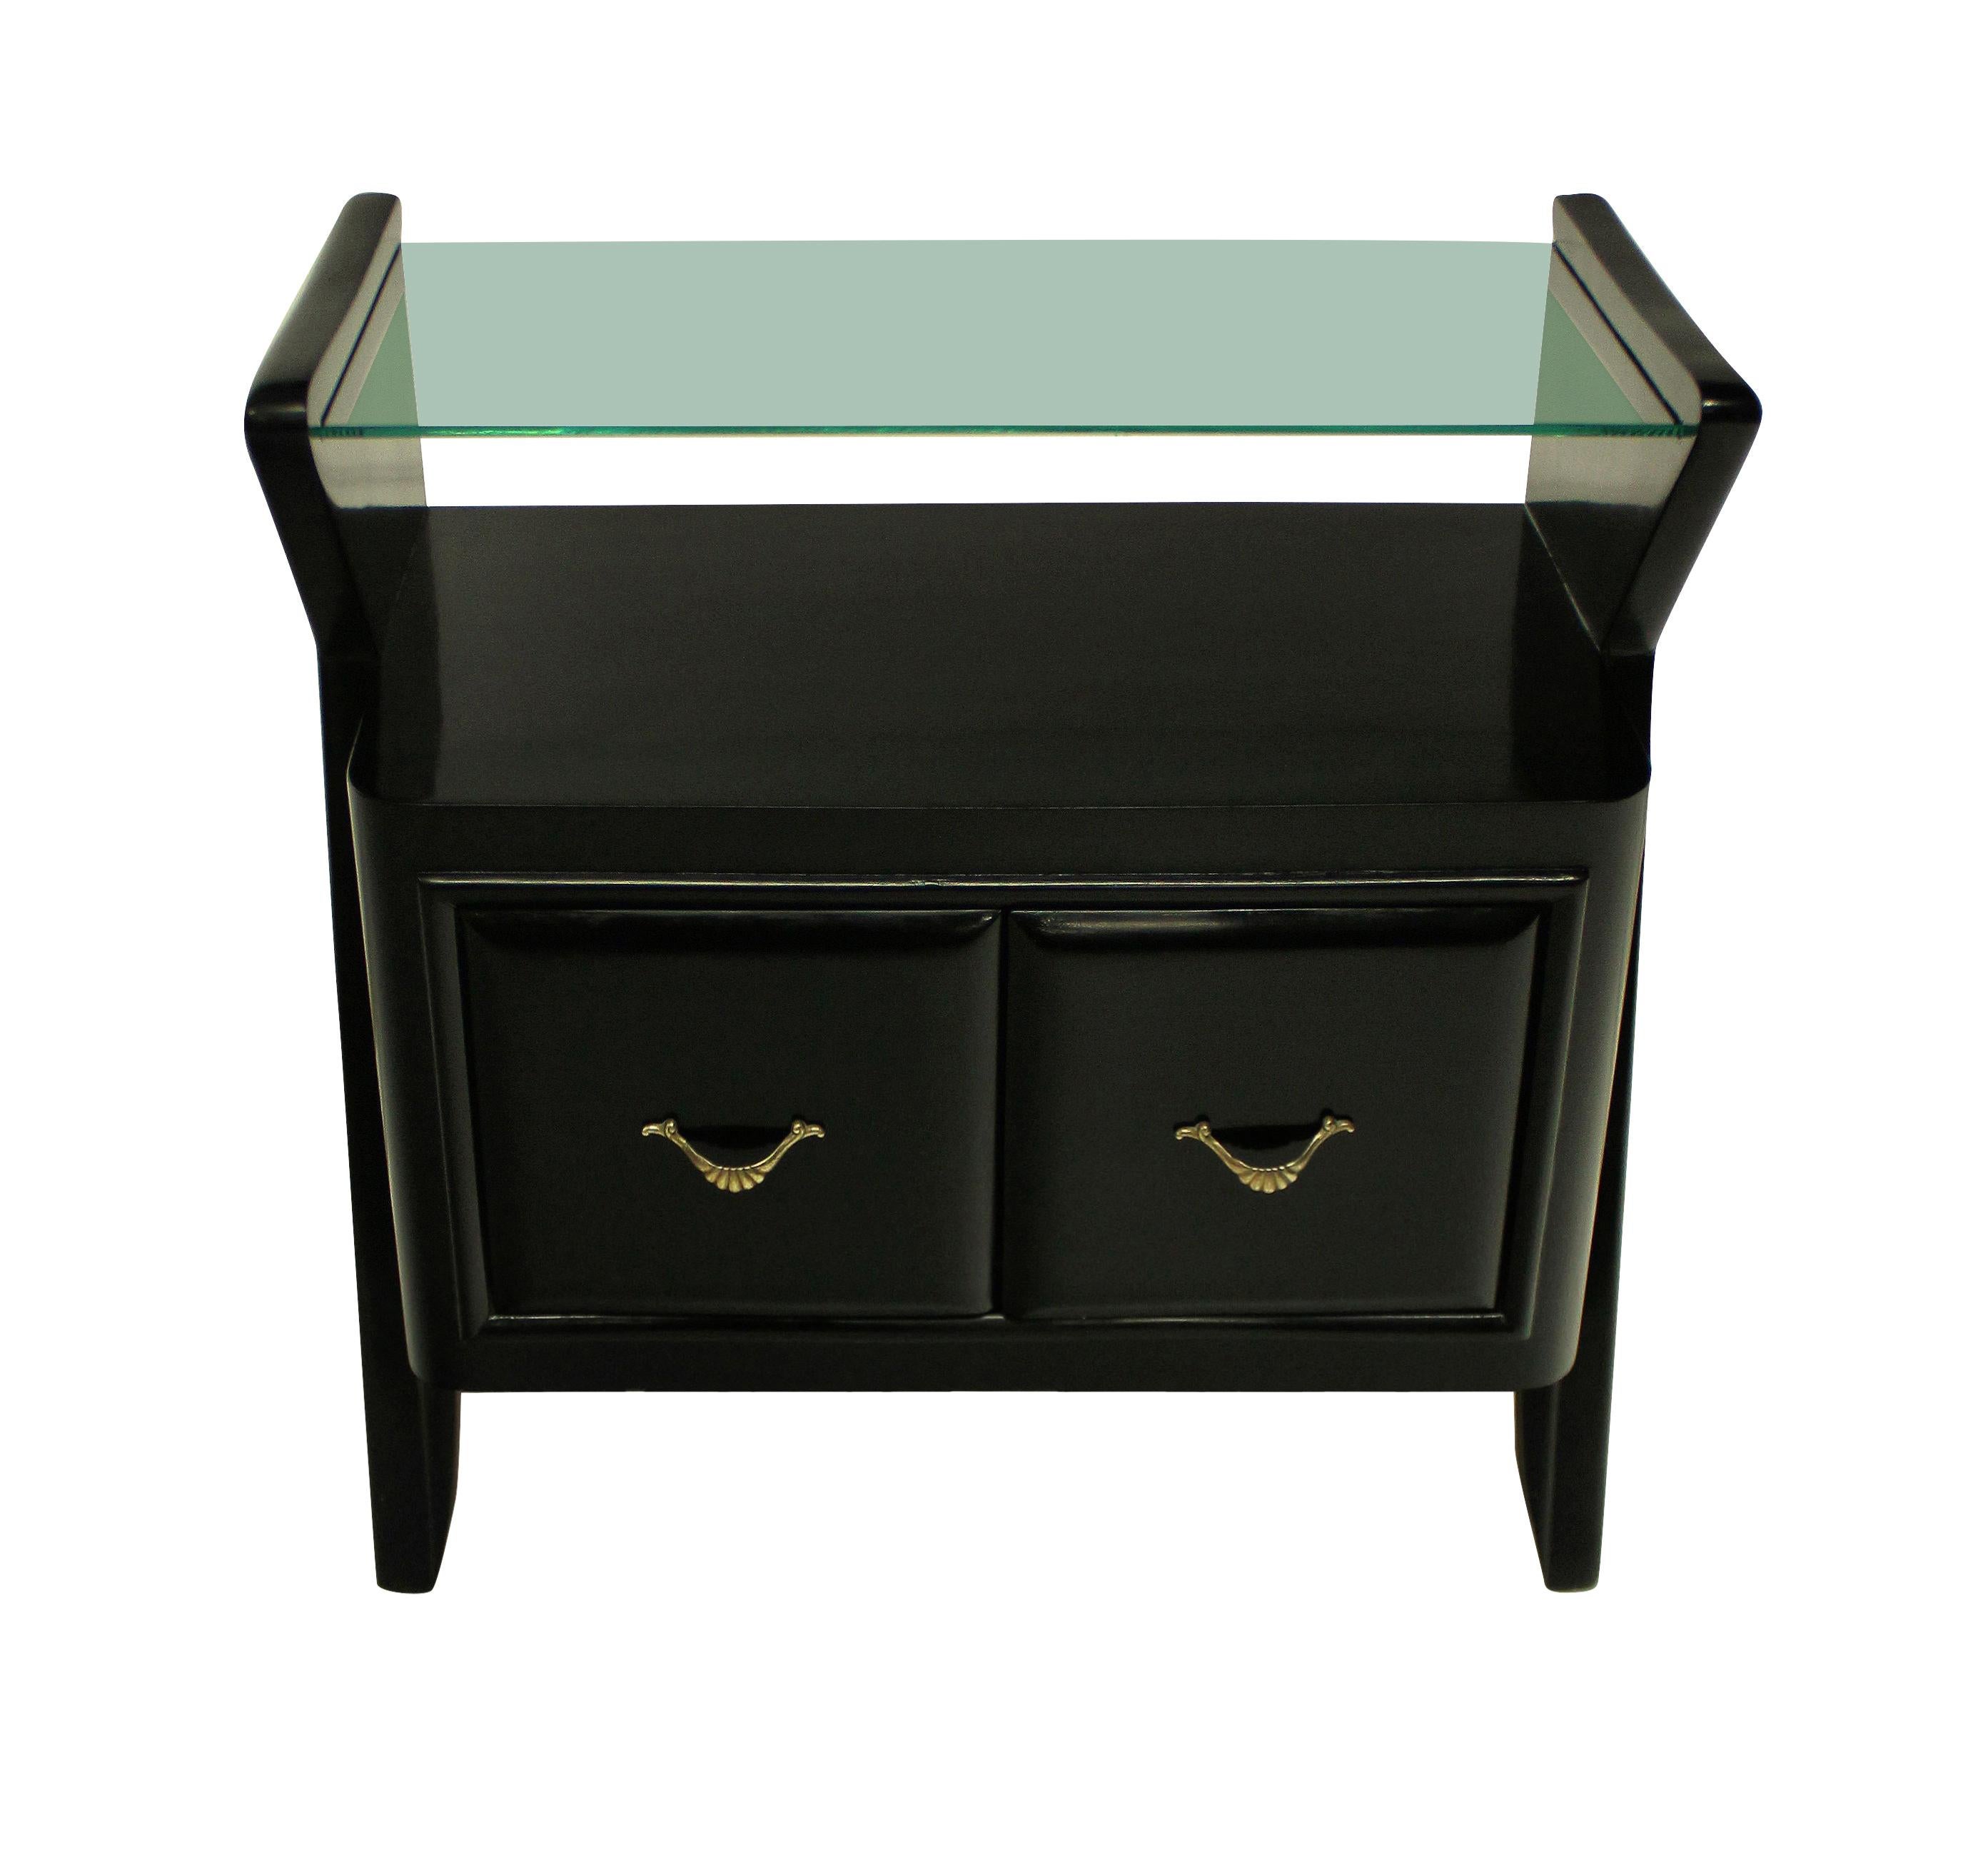 A pair of Italian ebonized nightstands of architectural design, with central cupboard, with glass shelves.